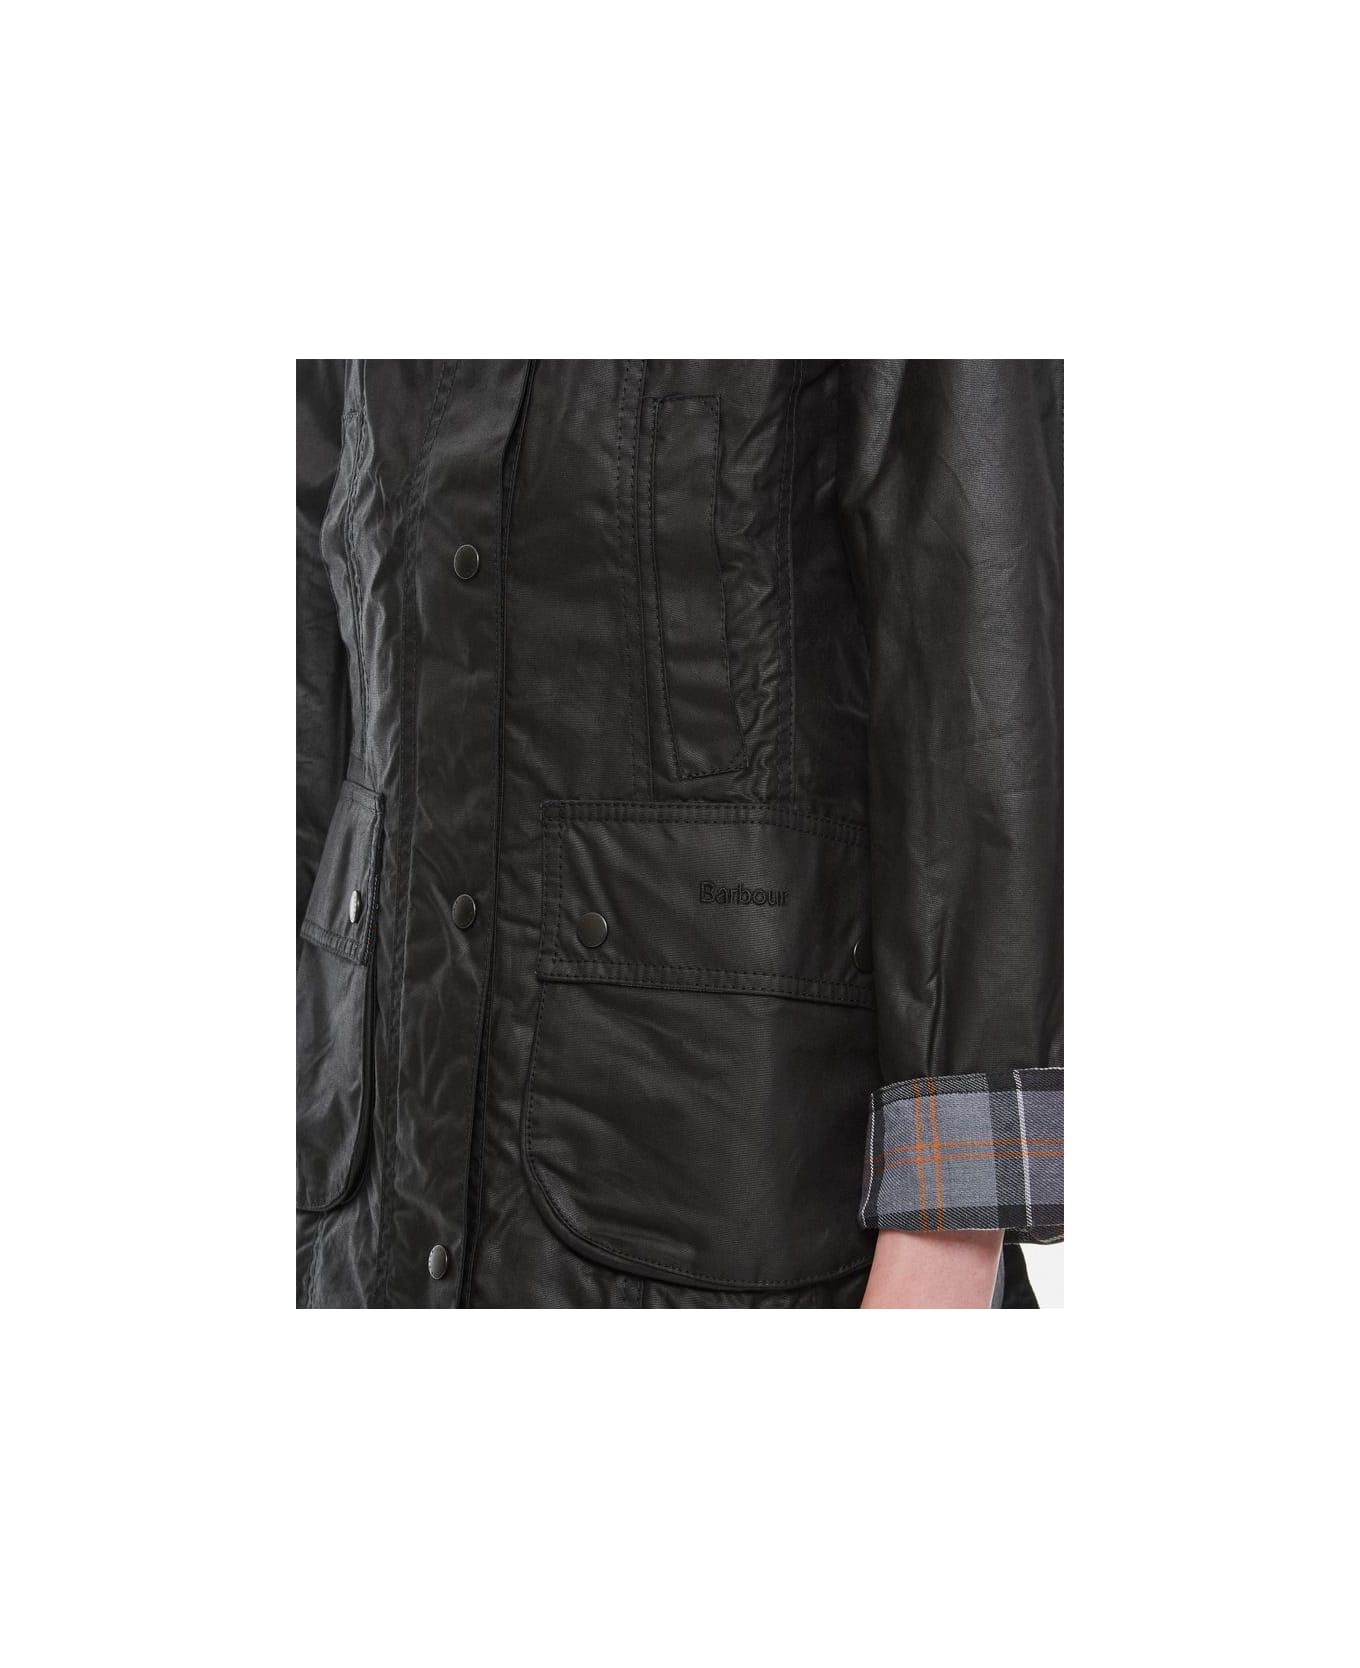 Barbour Beadnell Wax Jacket | italist